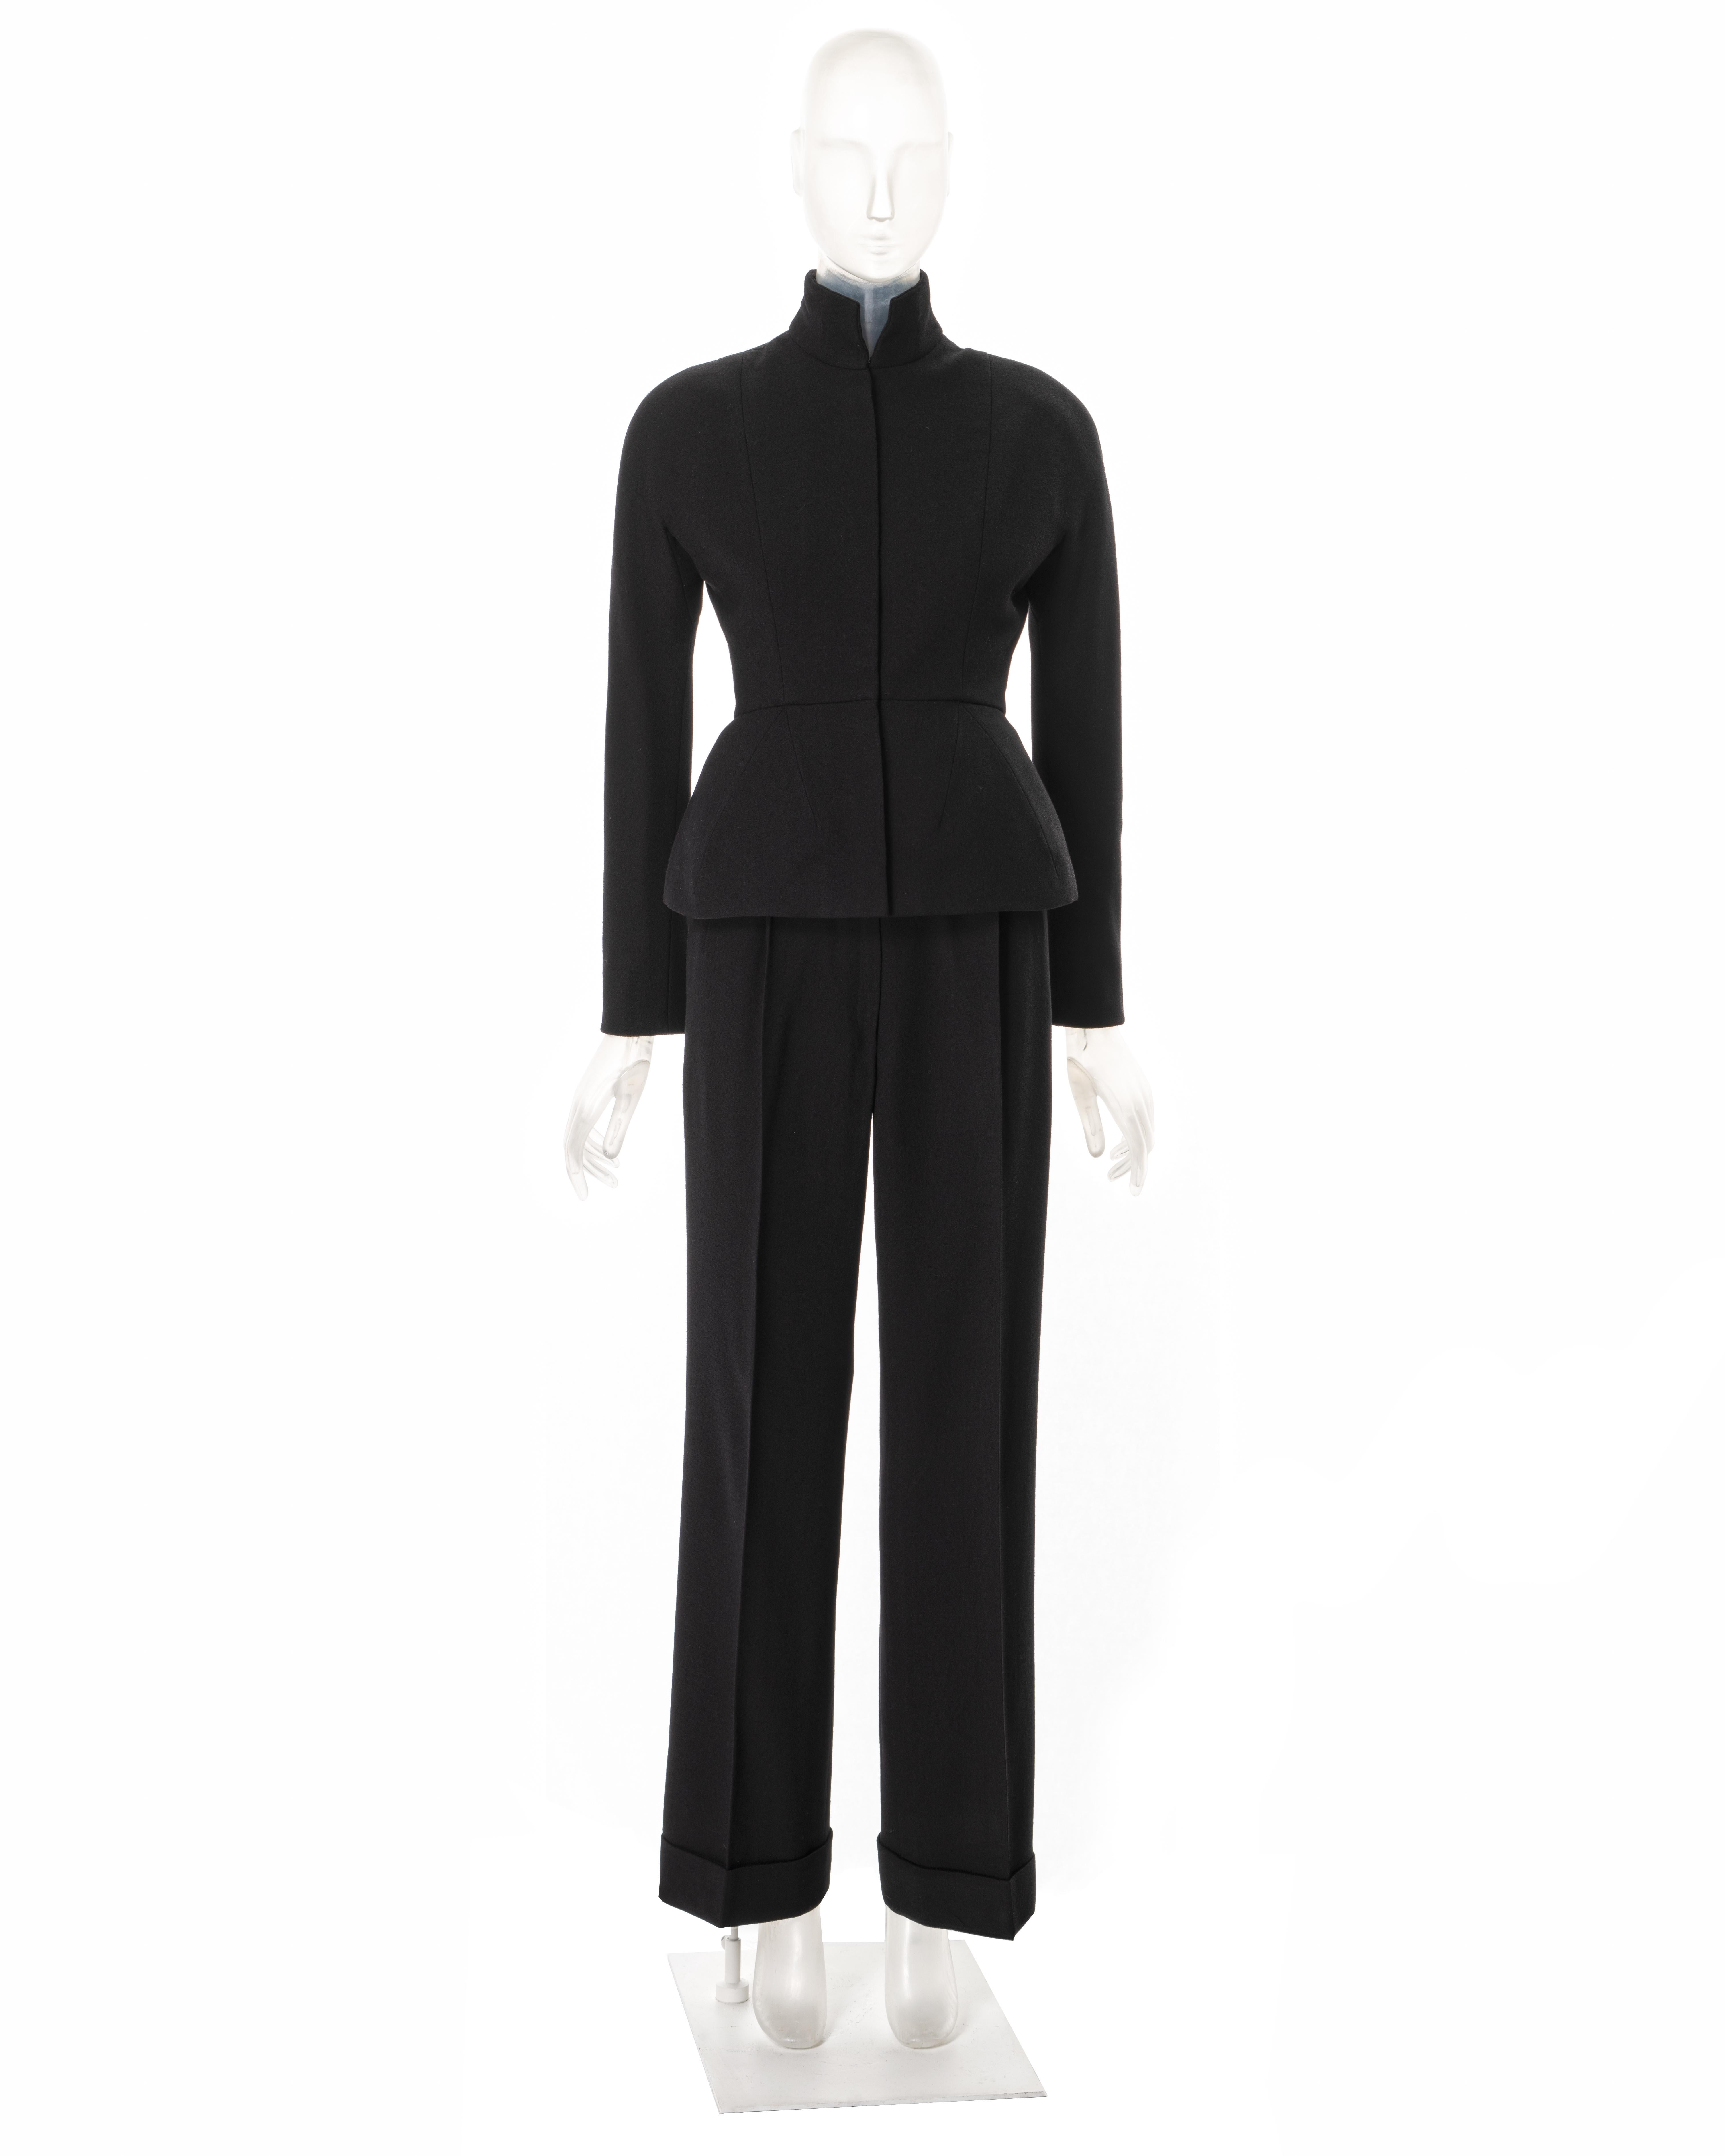 Christian Dior by John Galliano black wool crepe haute-couture bar suit, fw 1998 For Sale 2